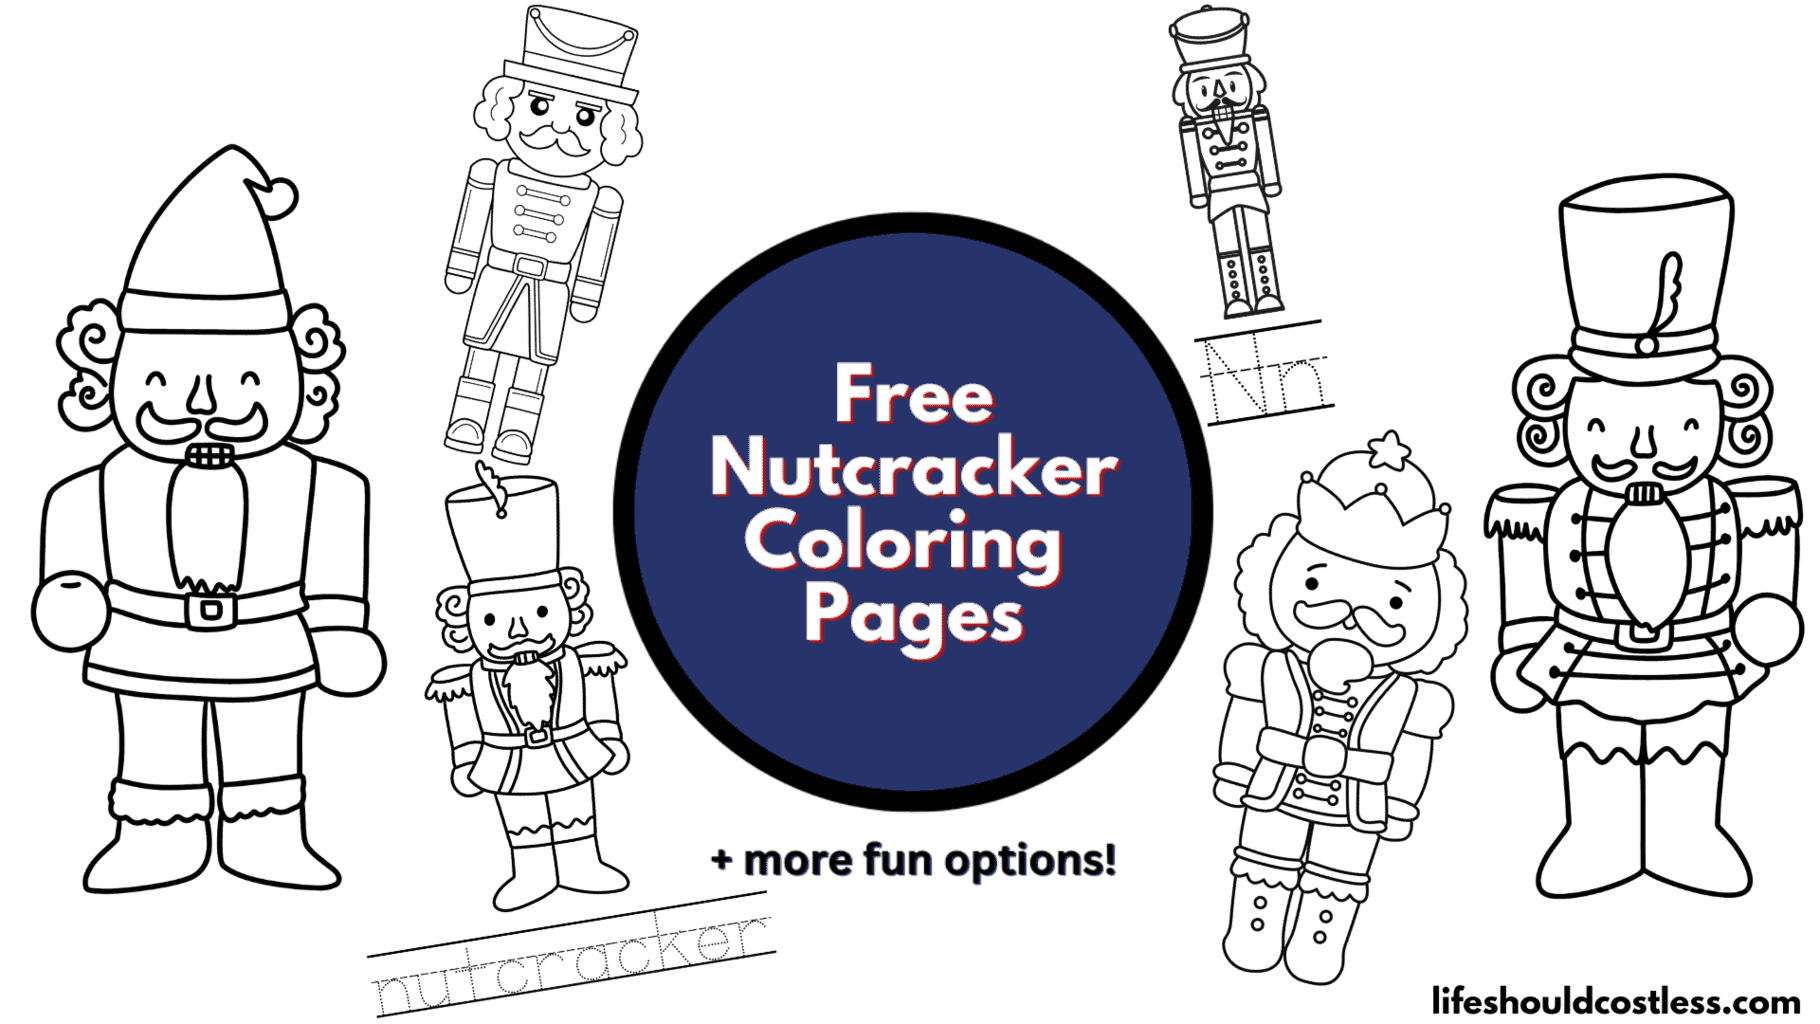 Nutcracker coloring pages free printable pdf templates